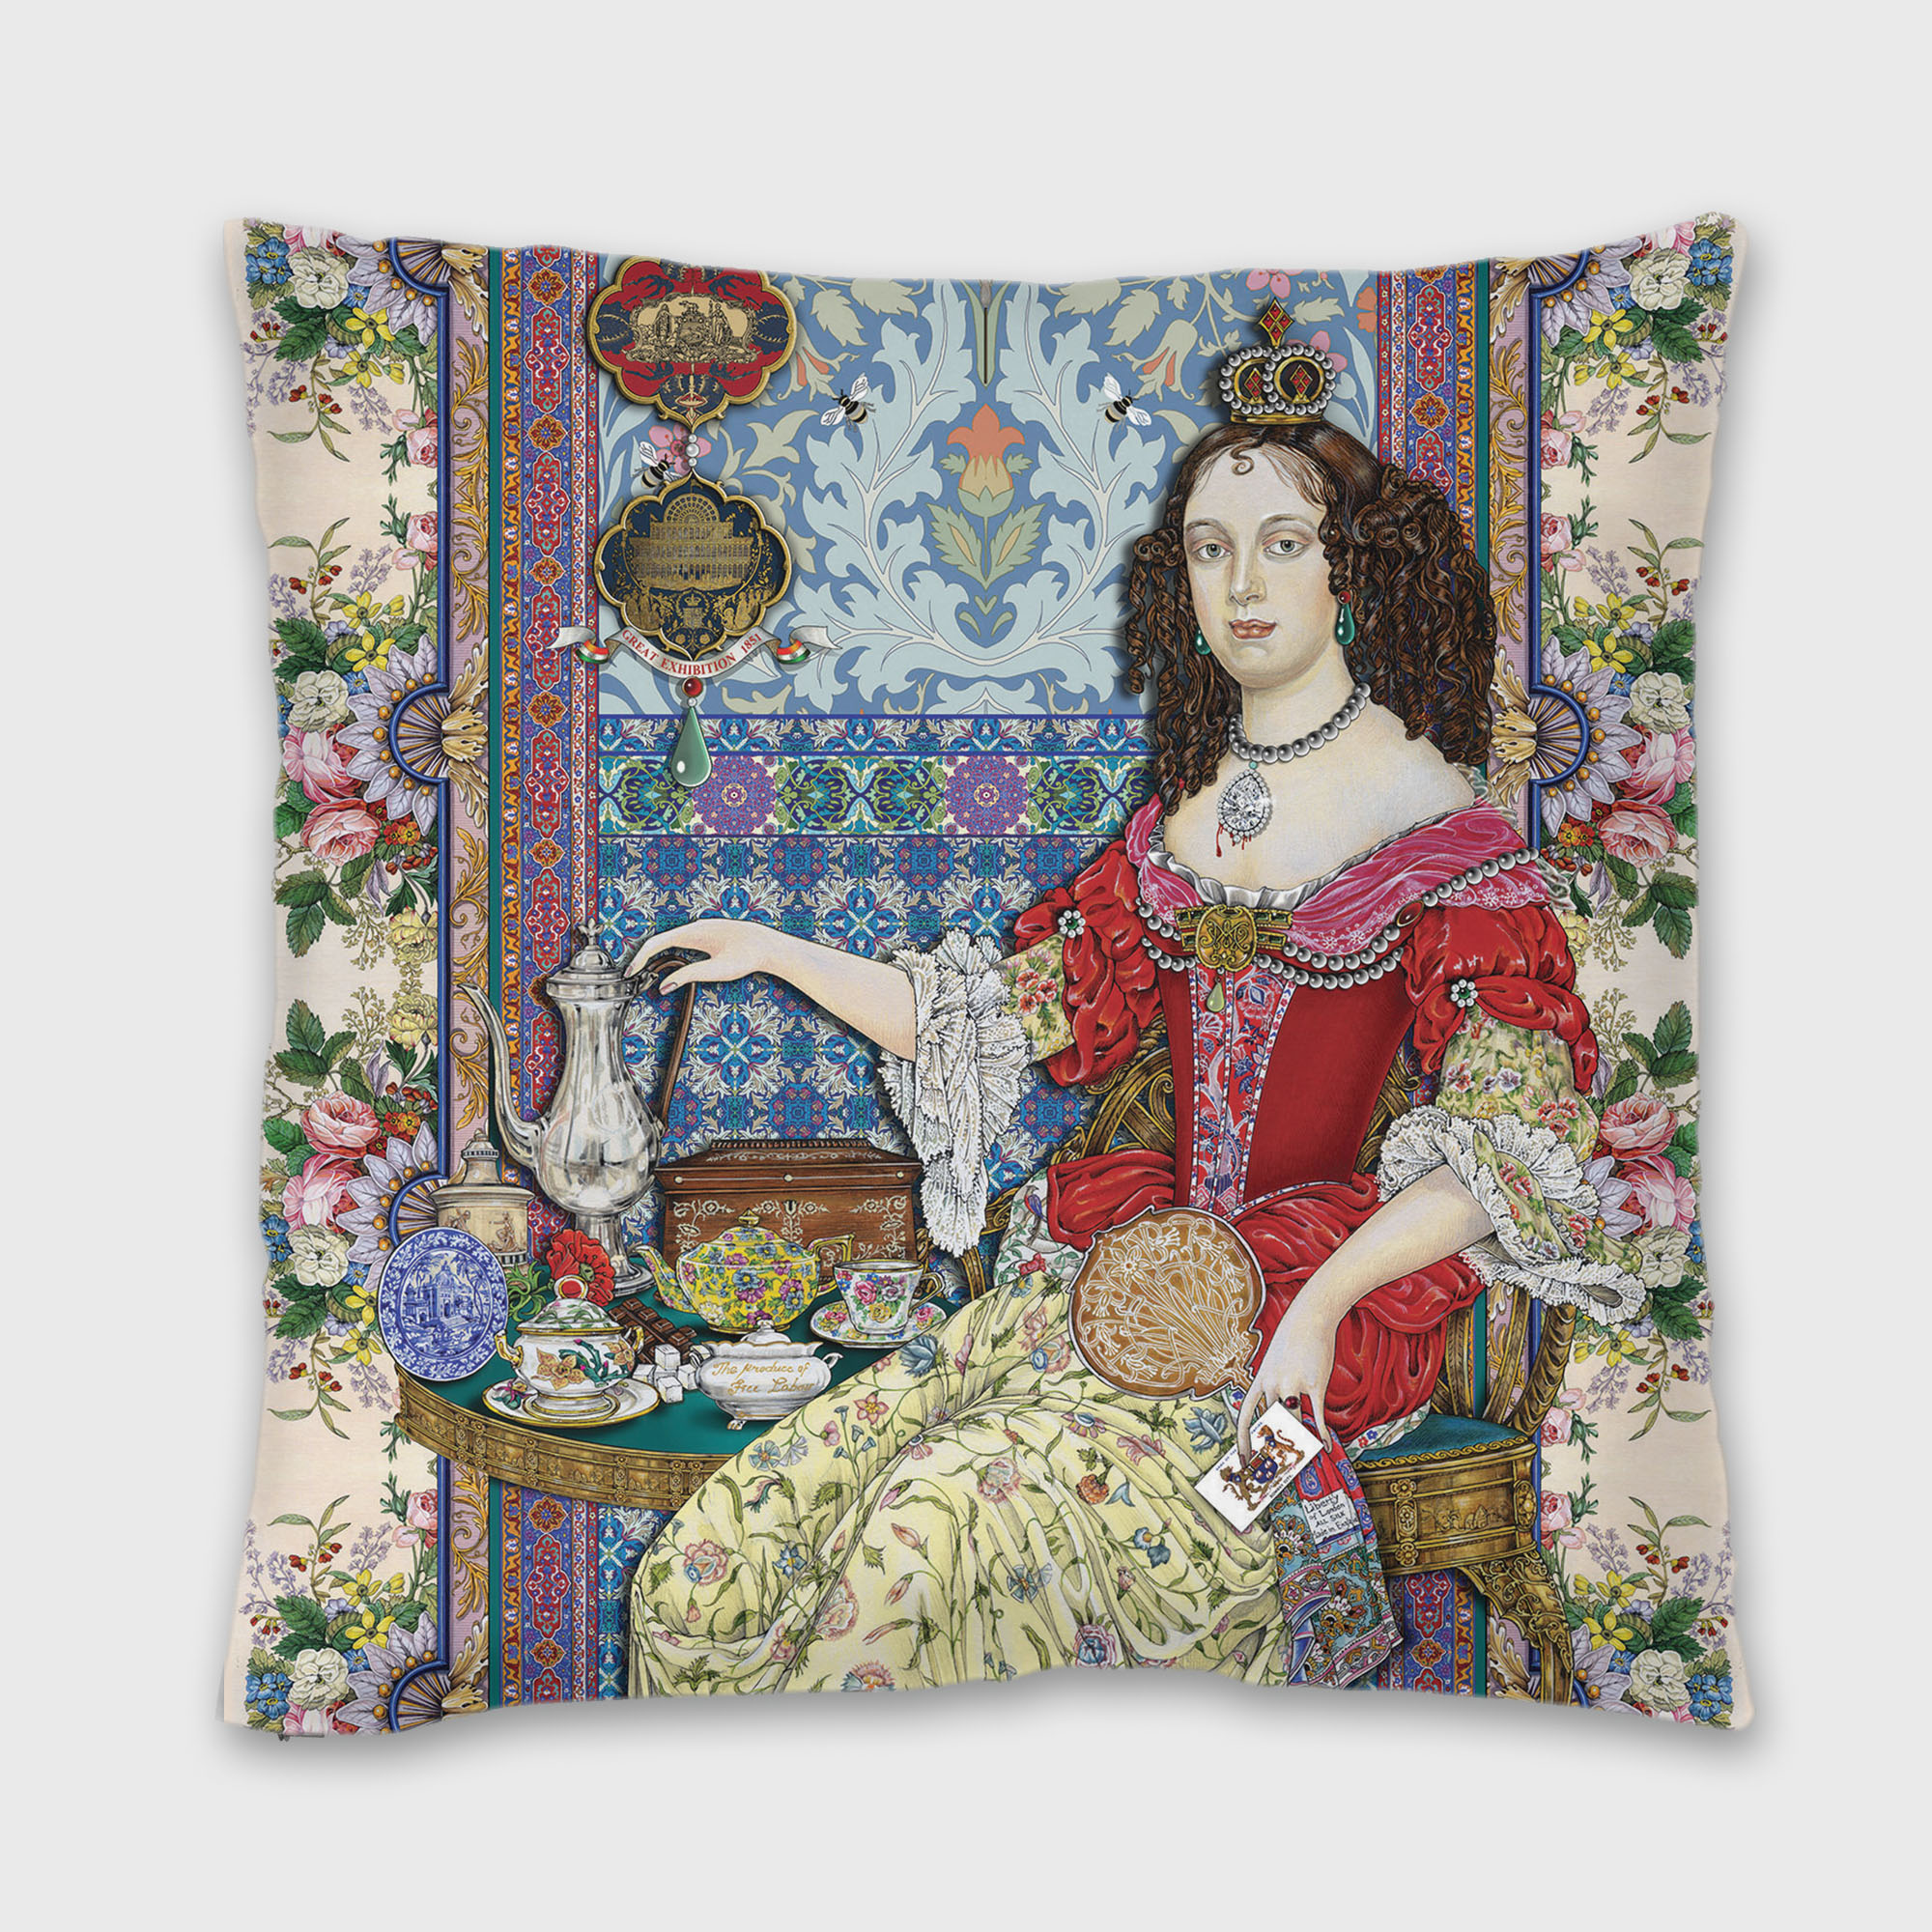 CHINTZ: Sugar and Spice, Not so Nice – Singh Twins Cushion Cover